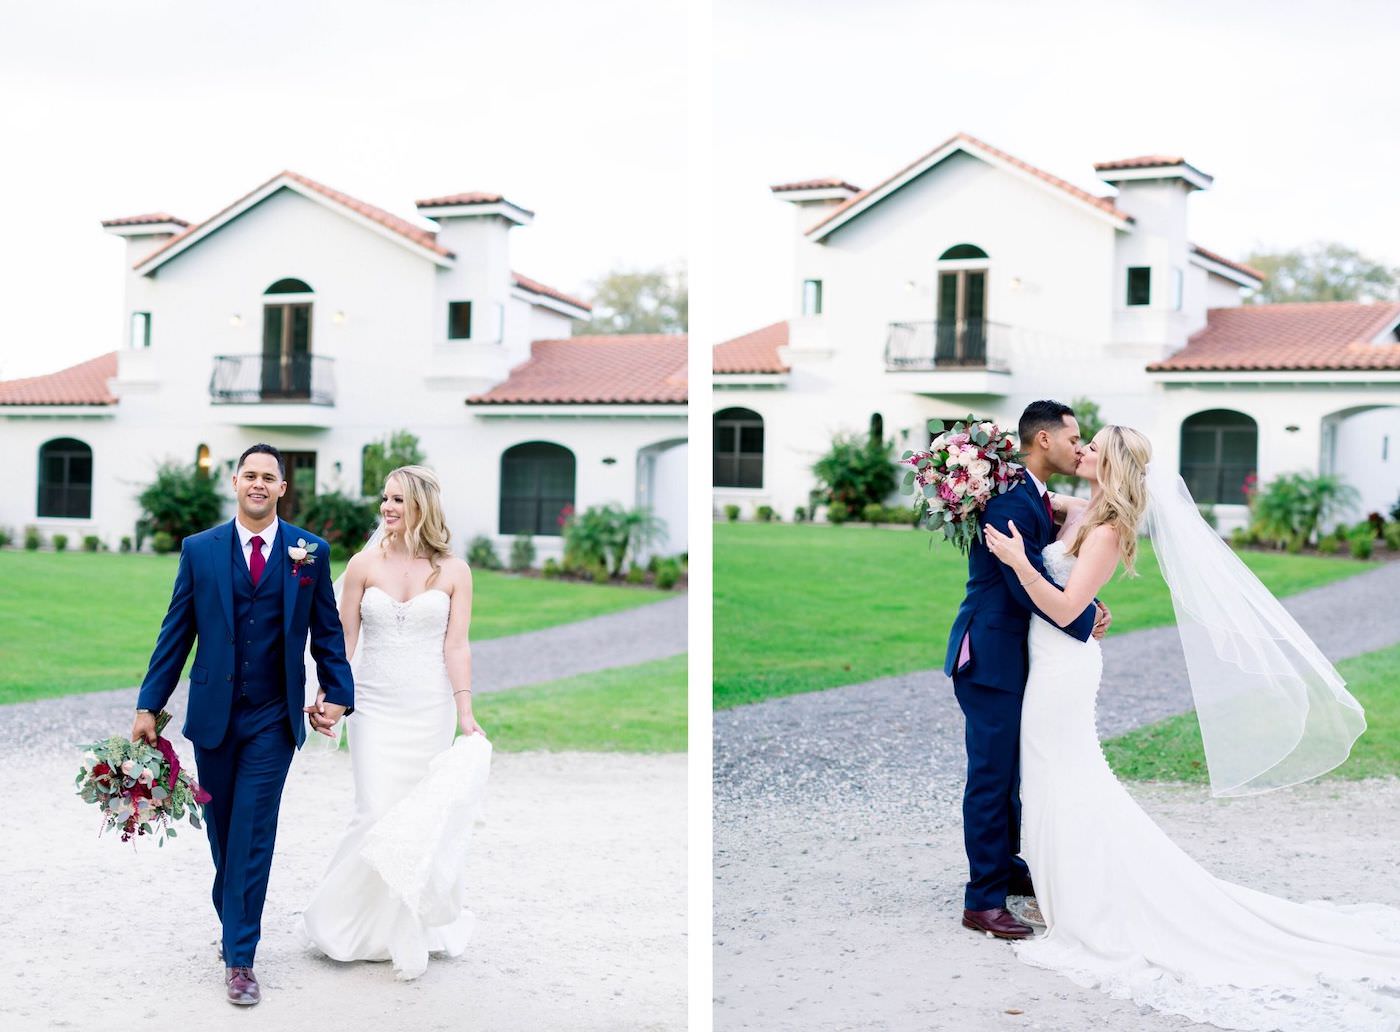 Outdoor Bride and Groom Portrait | Groom in Classic Navy Suit with Red Tie | Ivory Sheath Mermaid Wedding Dress with Illusion Lace Train and Fingertip Veil | Burgundy and Blush Pink Bridal Bouquet with Roses and Astilbe and Eucalyptus Greenery | Shauna and Jordon Photography